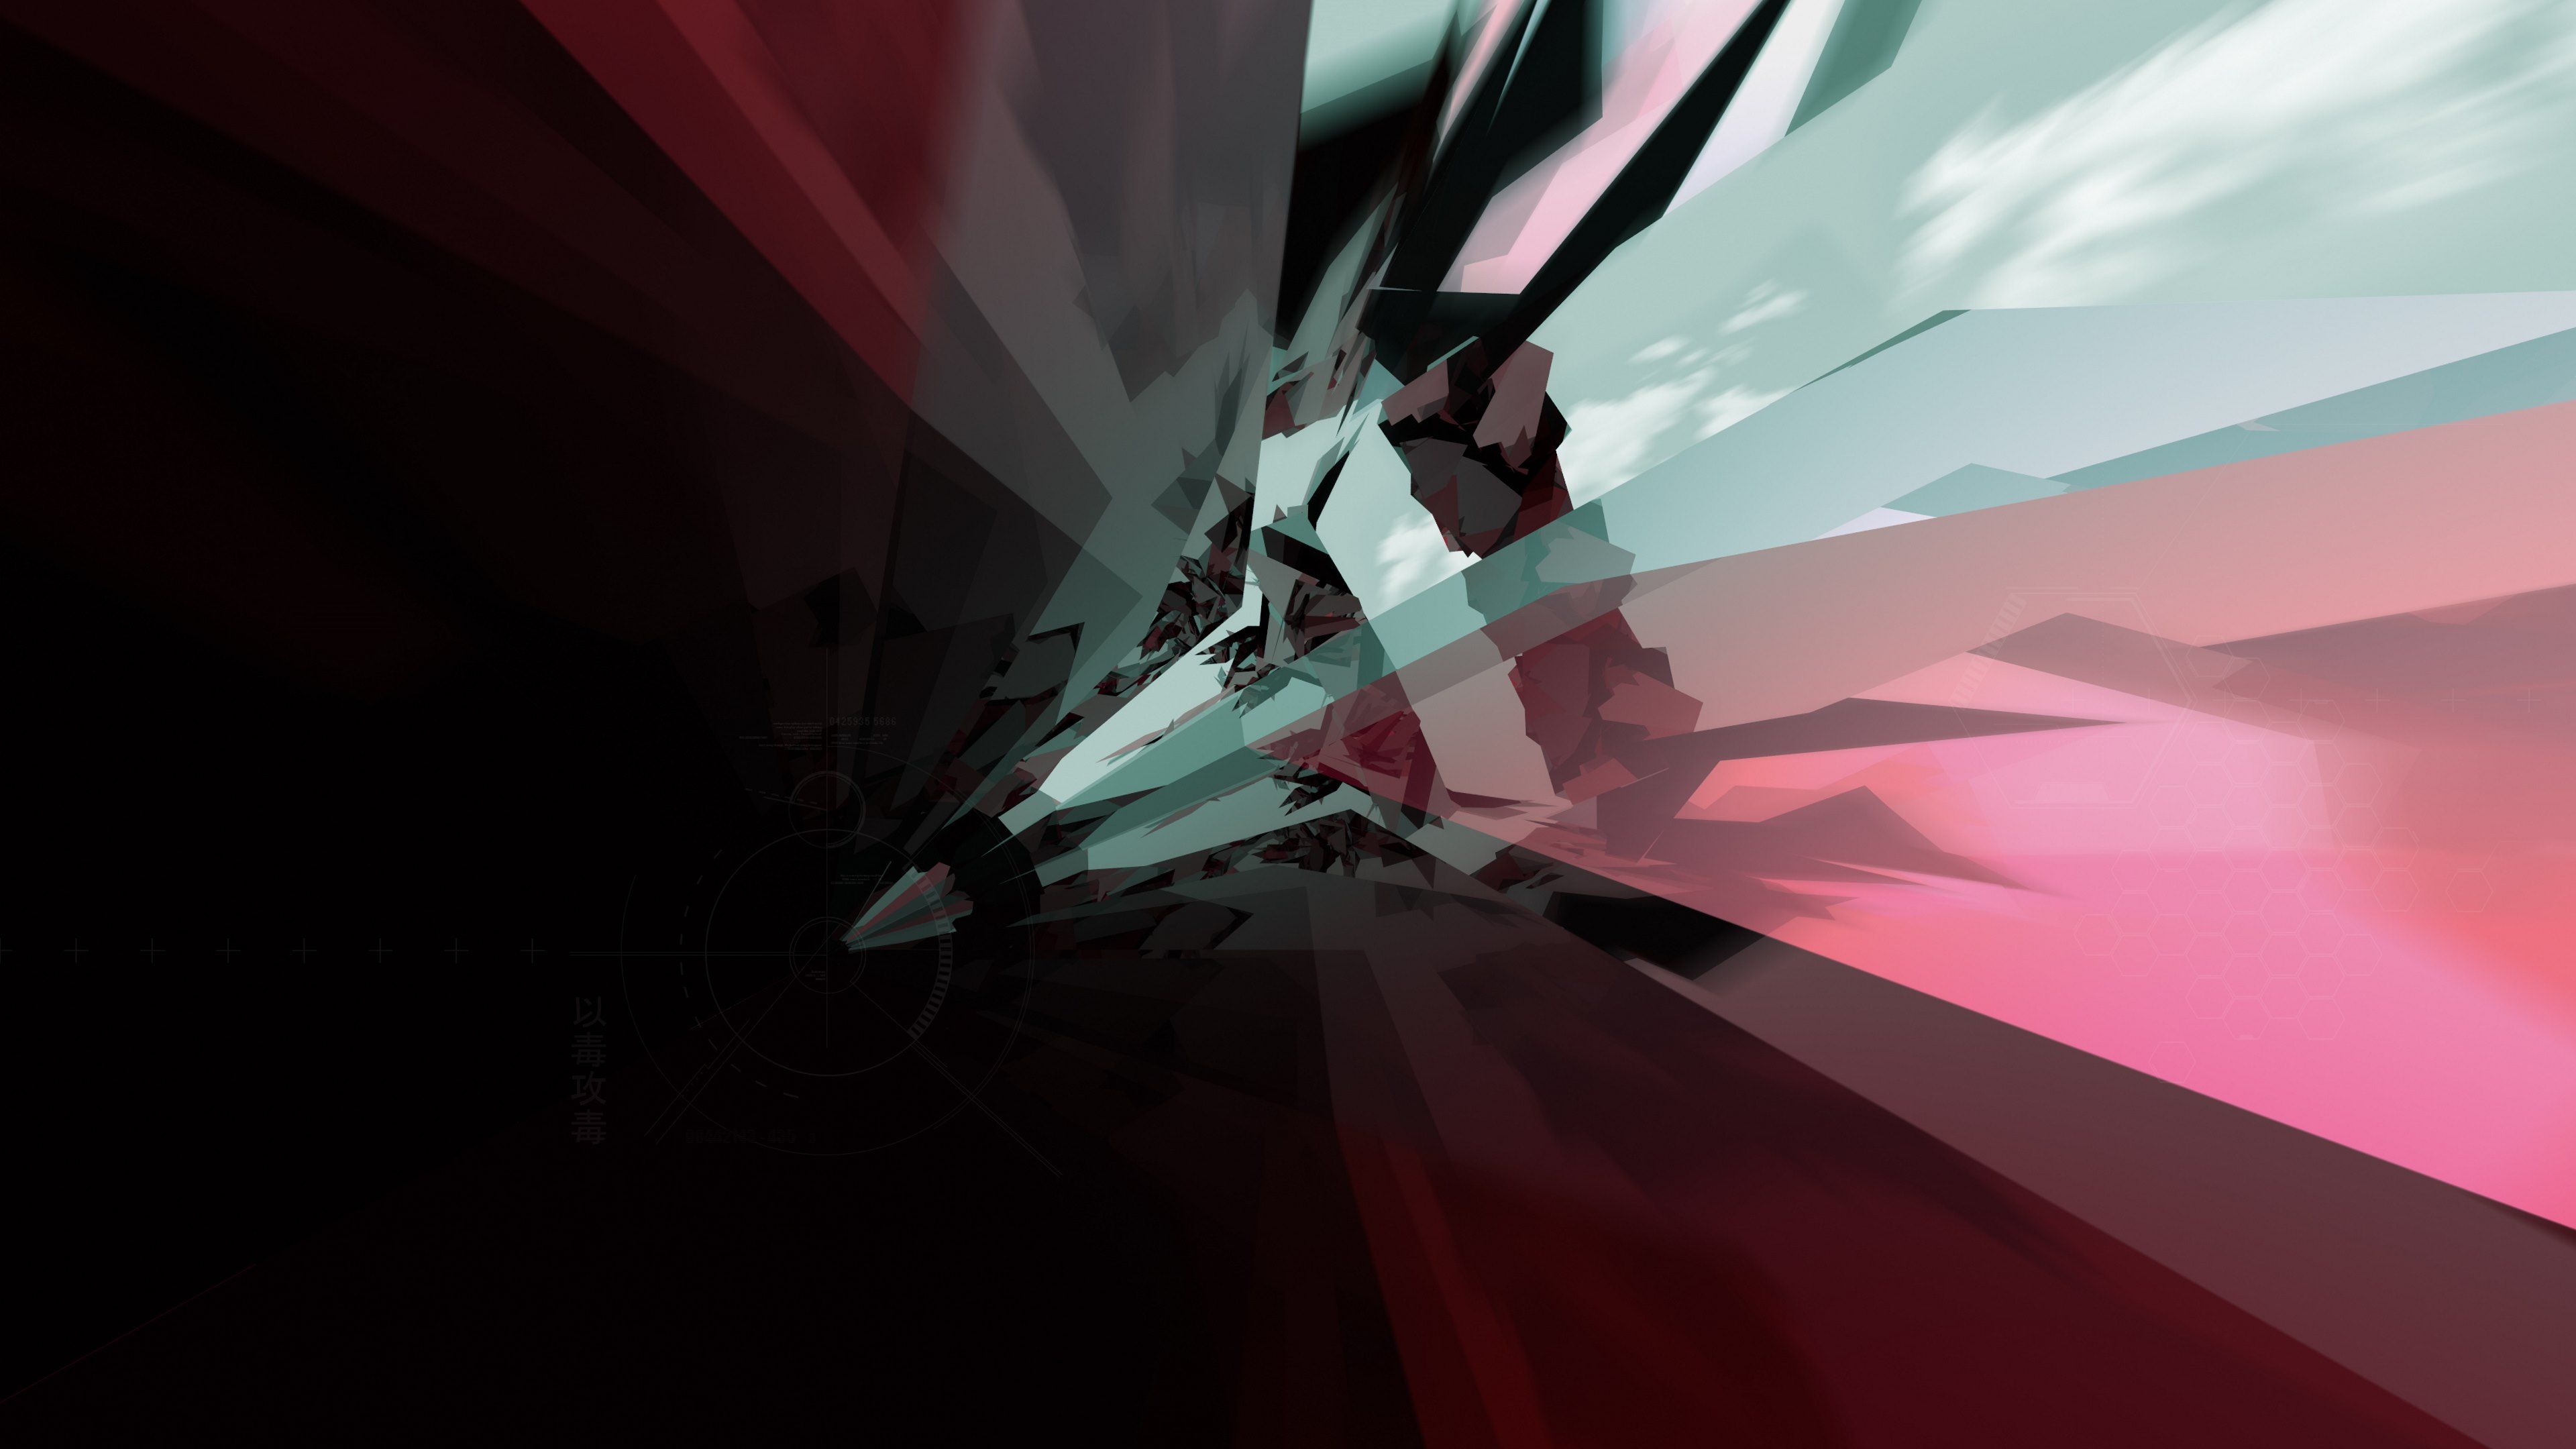 4k Abstract HD Background Wallpapers 11758 - HD Wallpapers Site